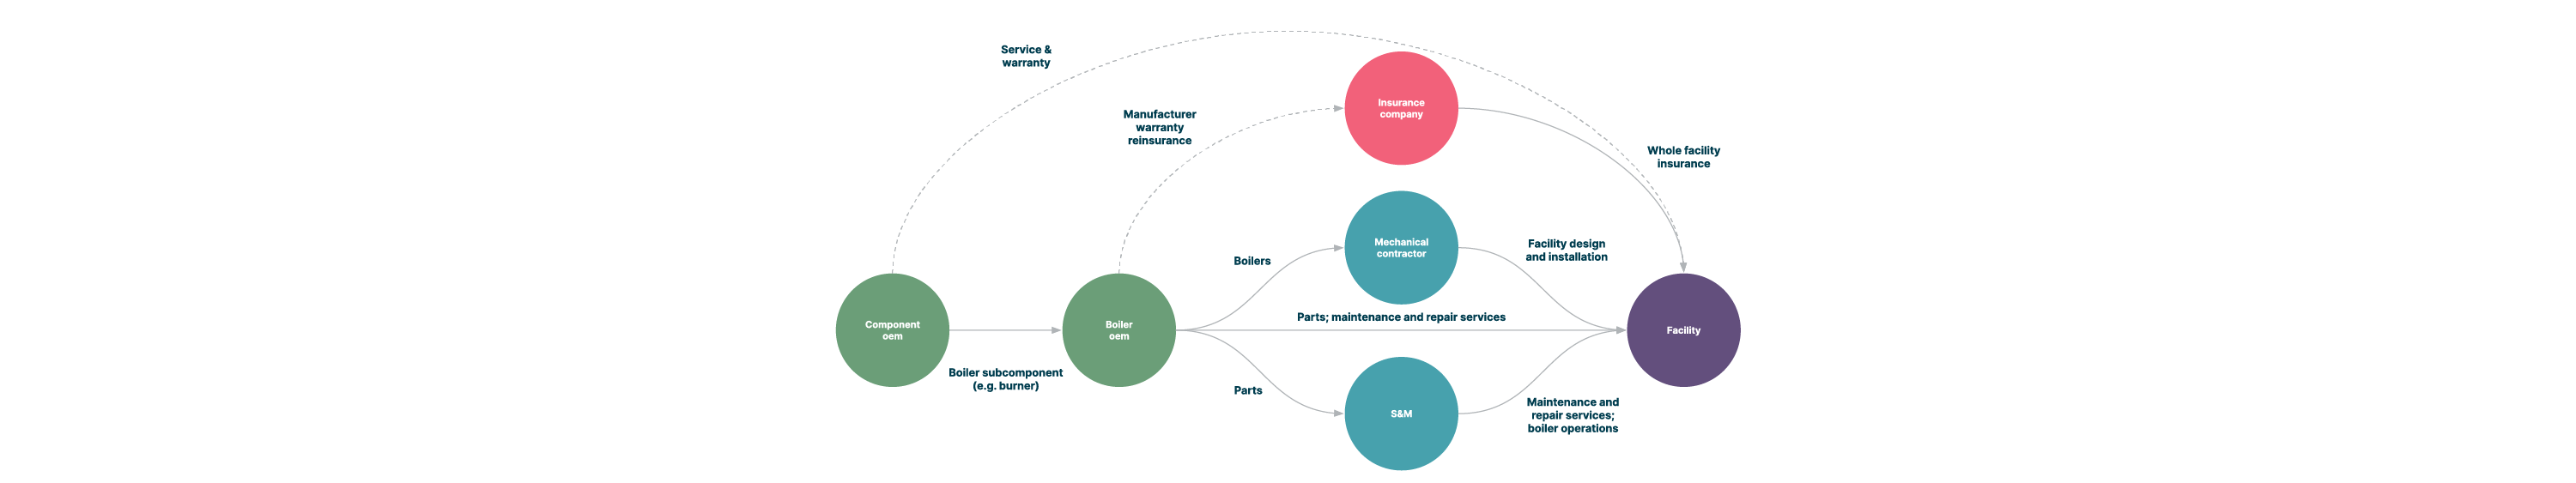 : An ecosystem diagram showing the life cycle of industrial machinery, including the stages of manufacture, sale, maintenance and insurance against downtime and failure. The diagram shows different components and their interactions within the ecosystem.